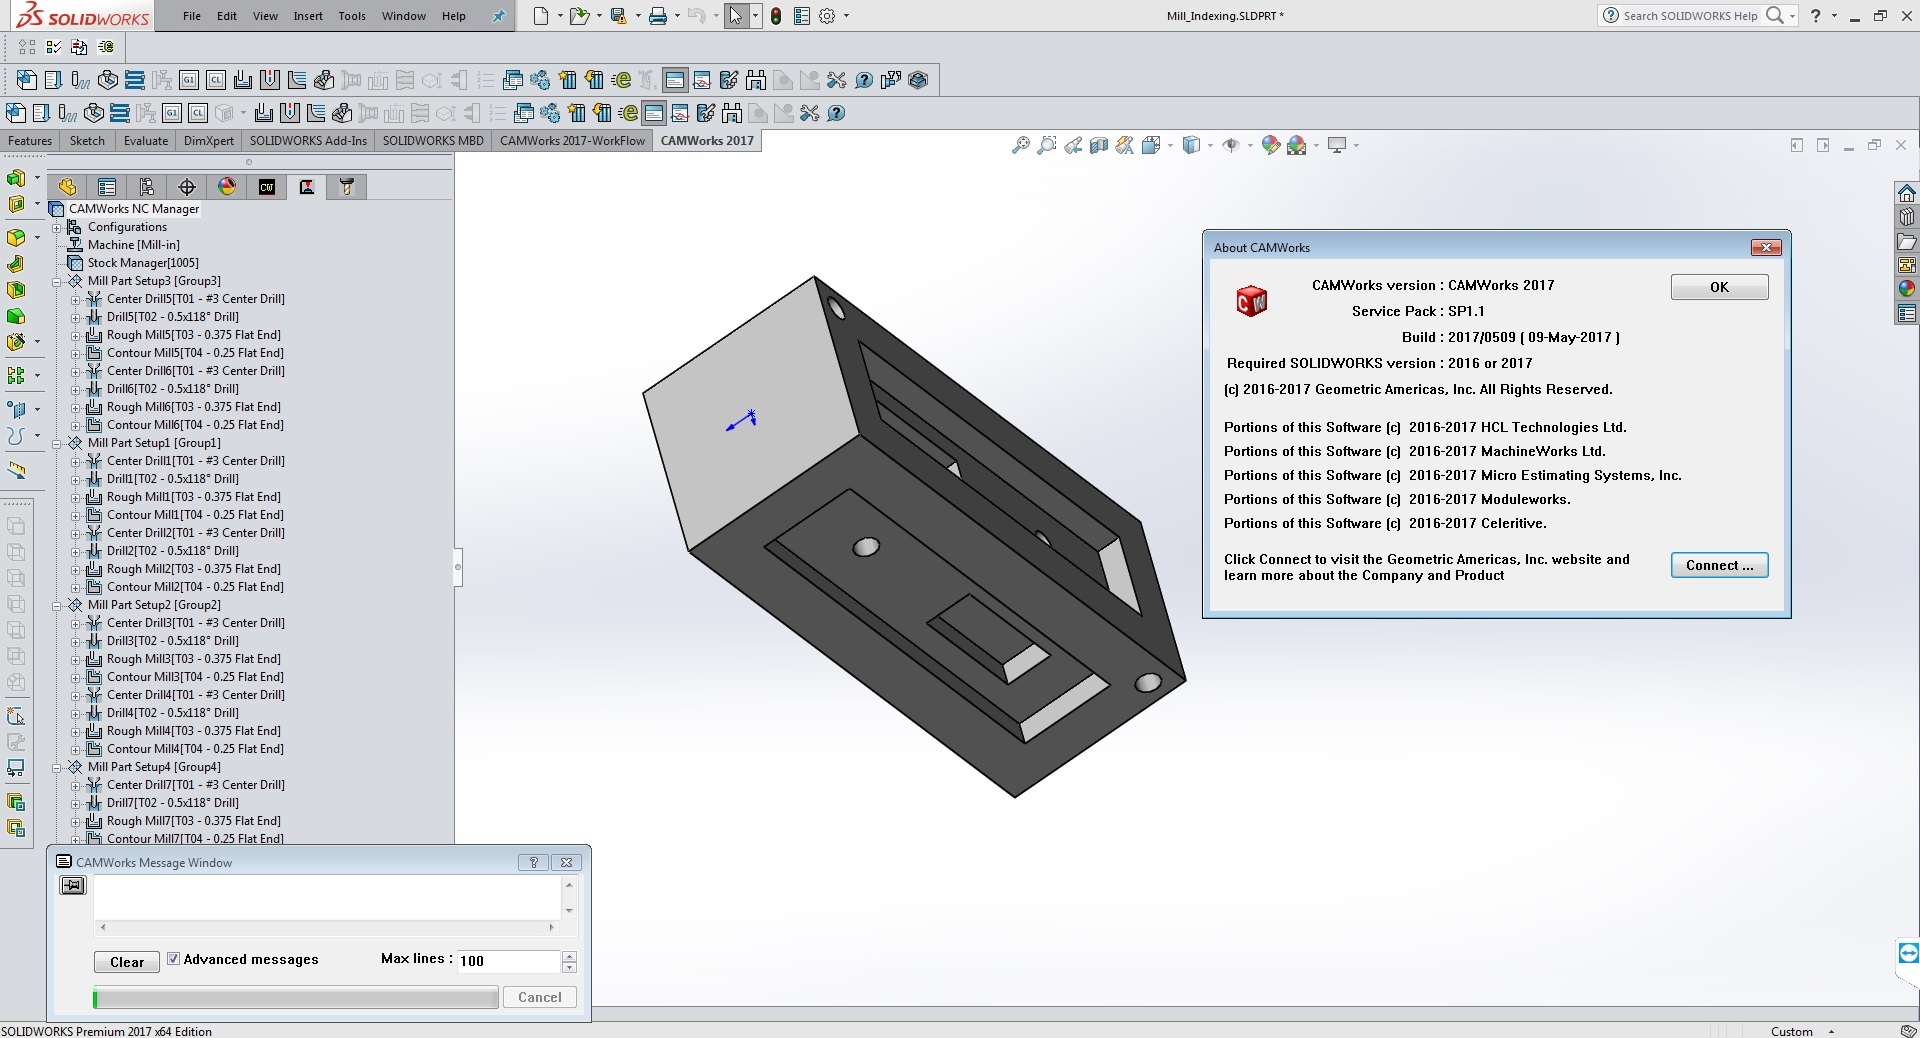 Working with CAMWorks 2017 SP1.1 for SolidWorks 2016-2017